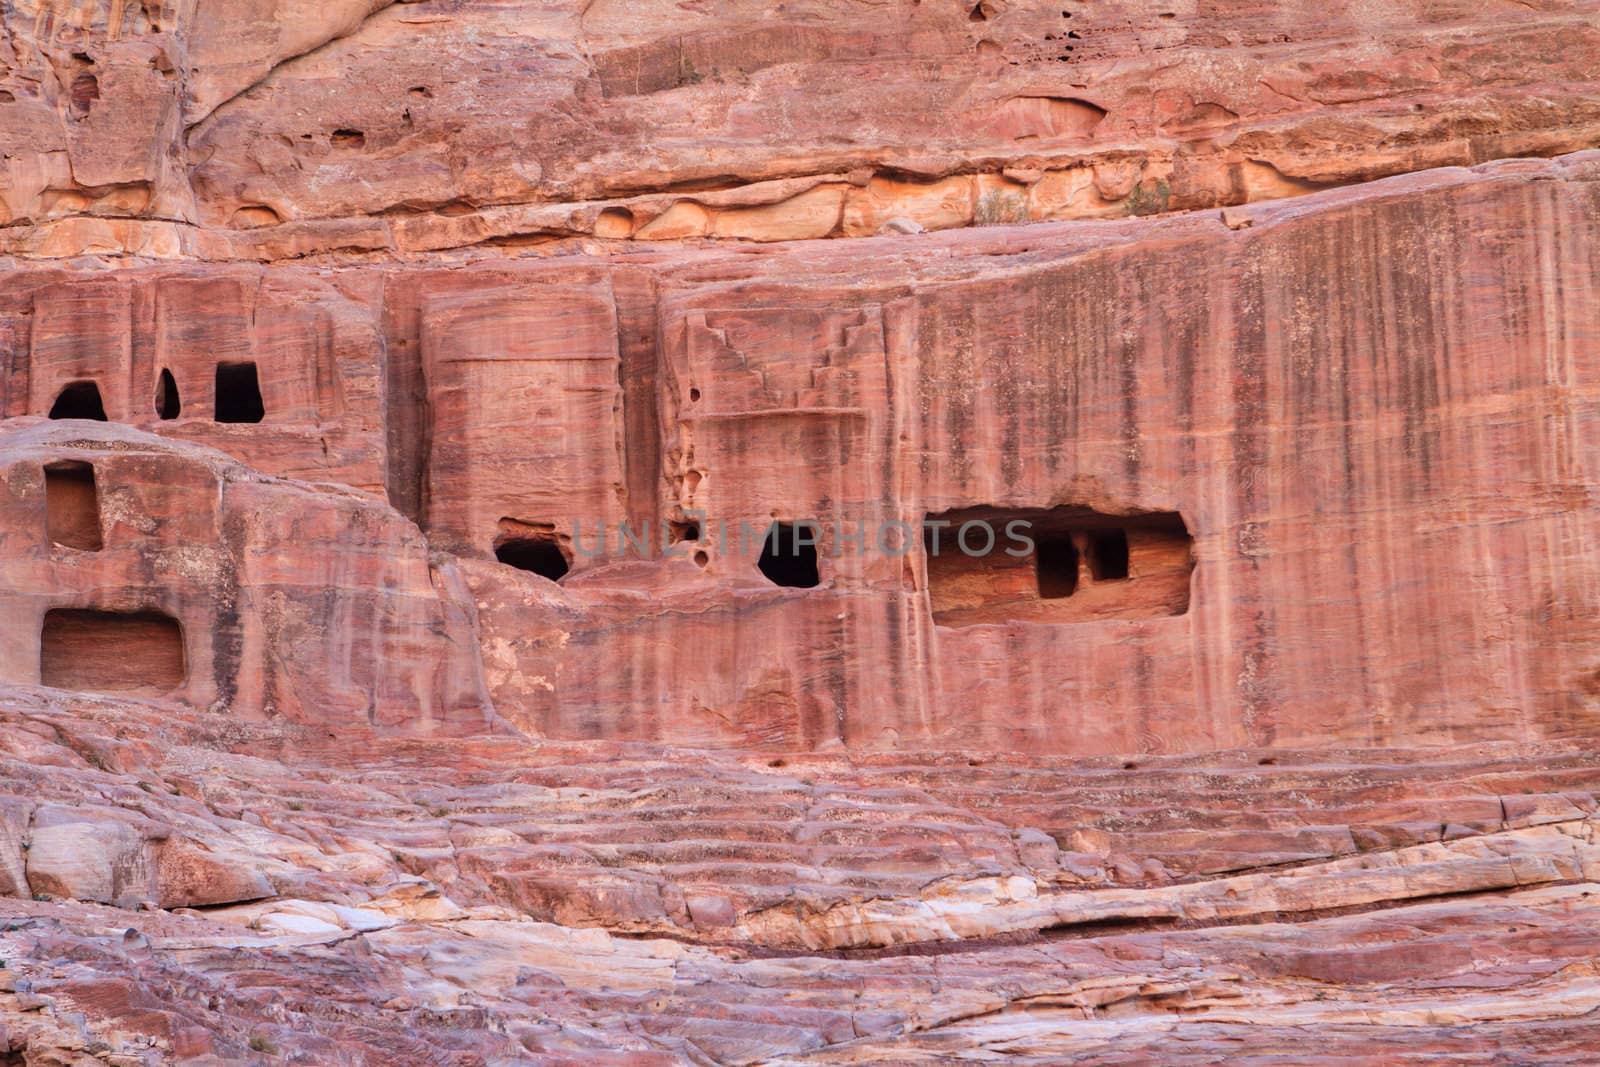 The Theatre, in Petra, Jordan  by thanomphong